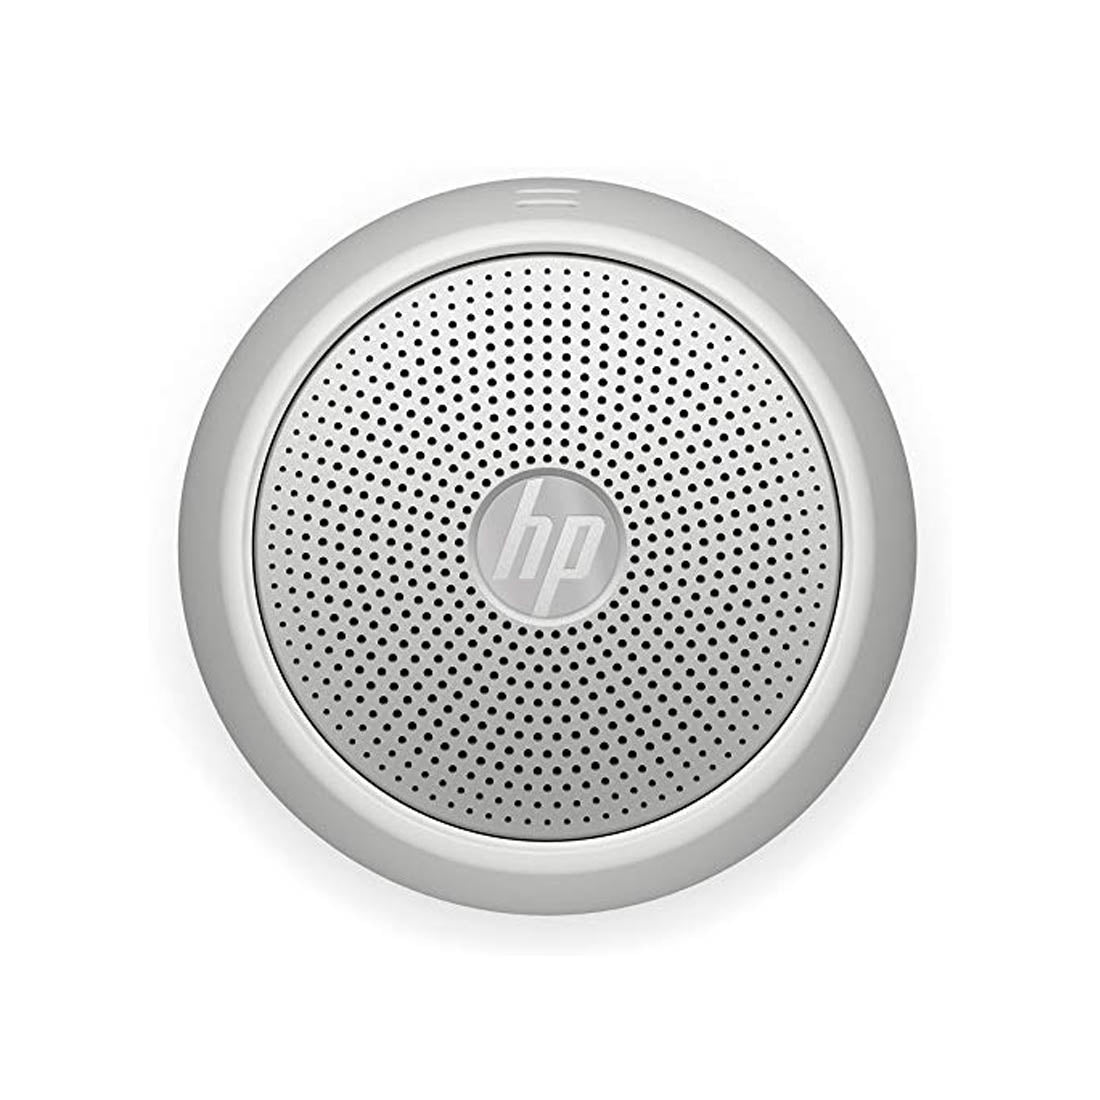 HP 360 Portable Bluetooth 5 Speaker with IP54 Rating and Built-in Microphone